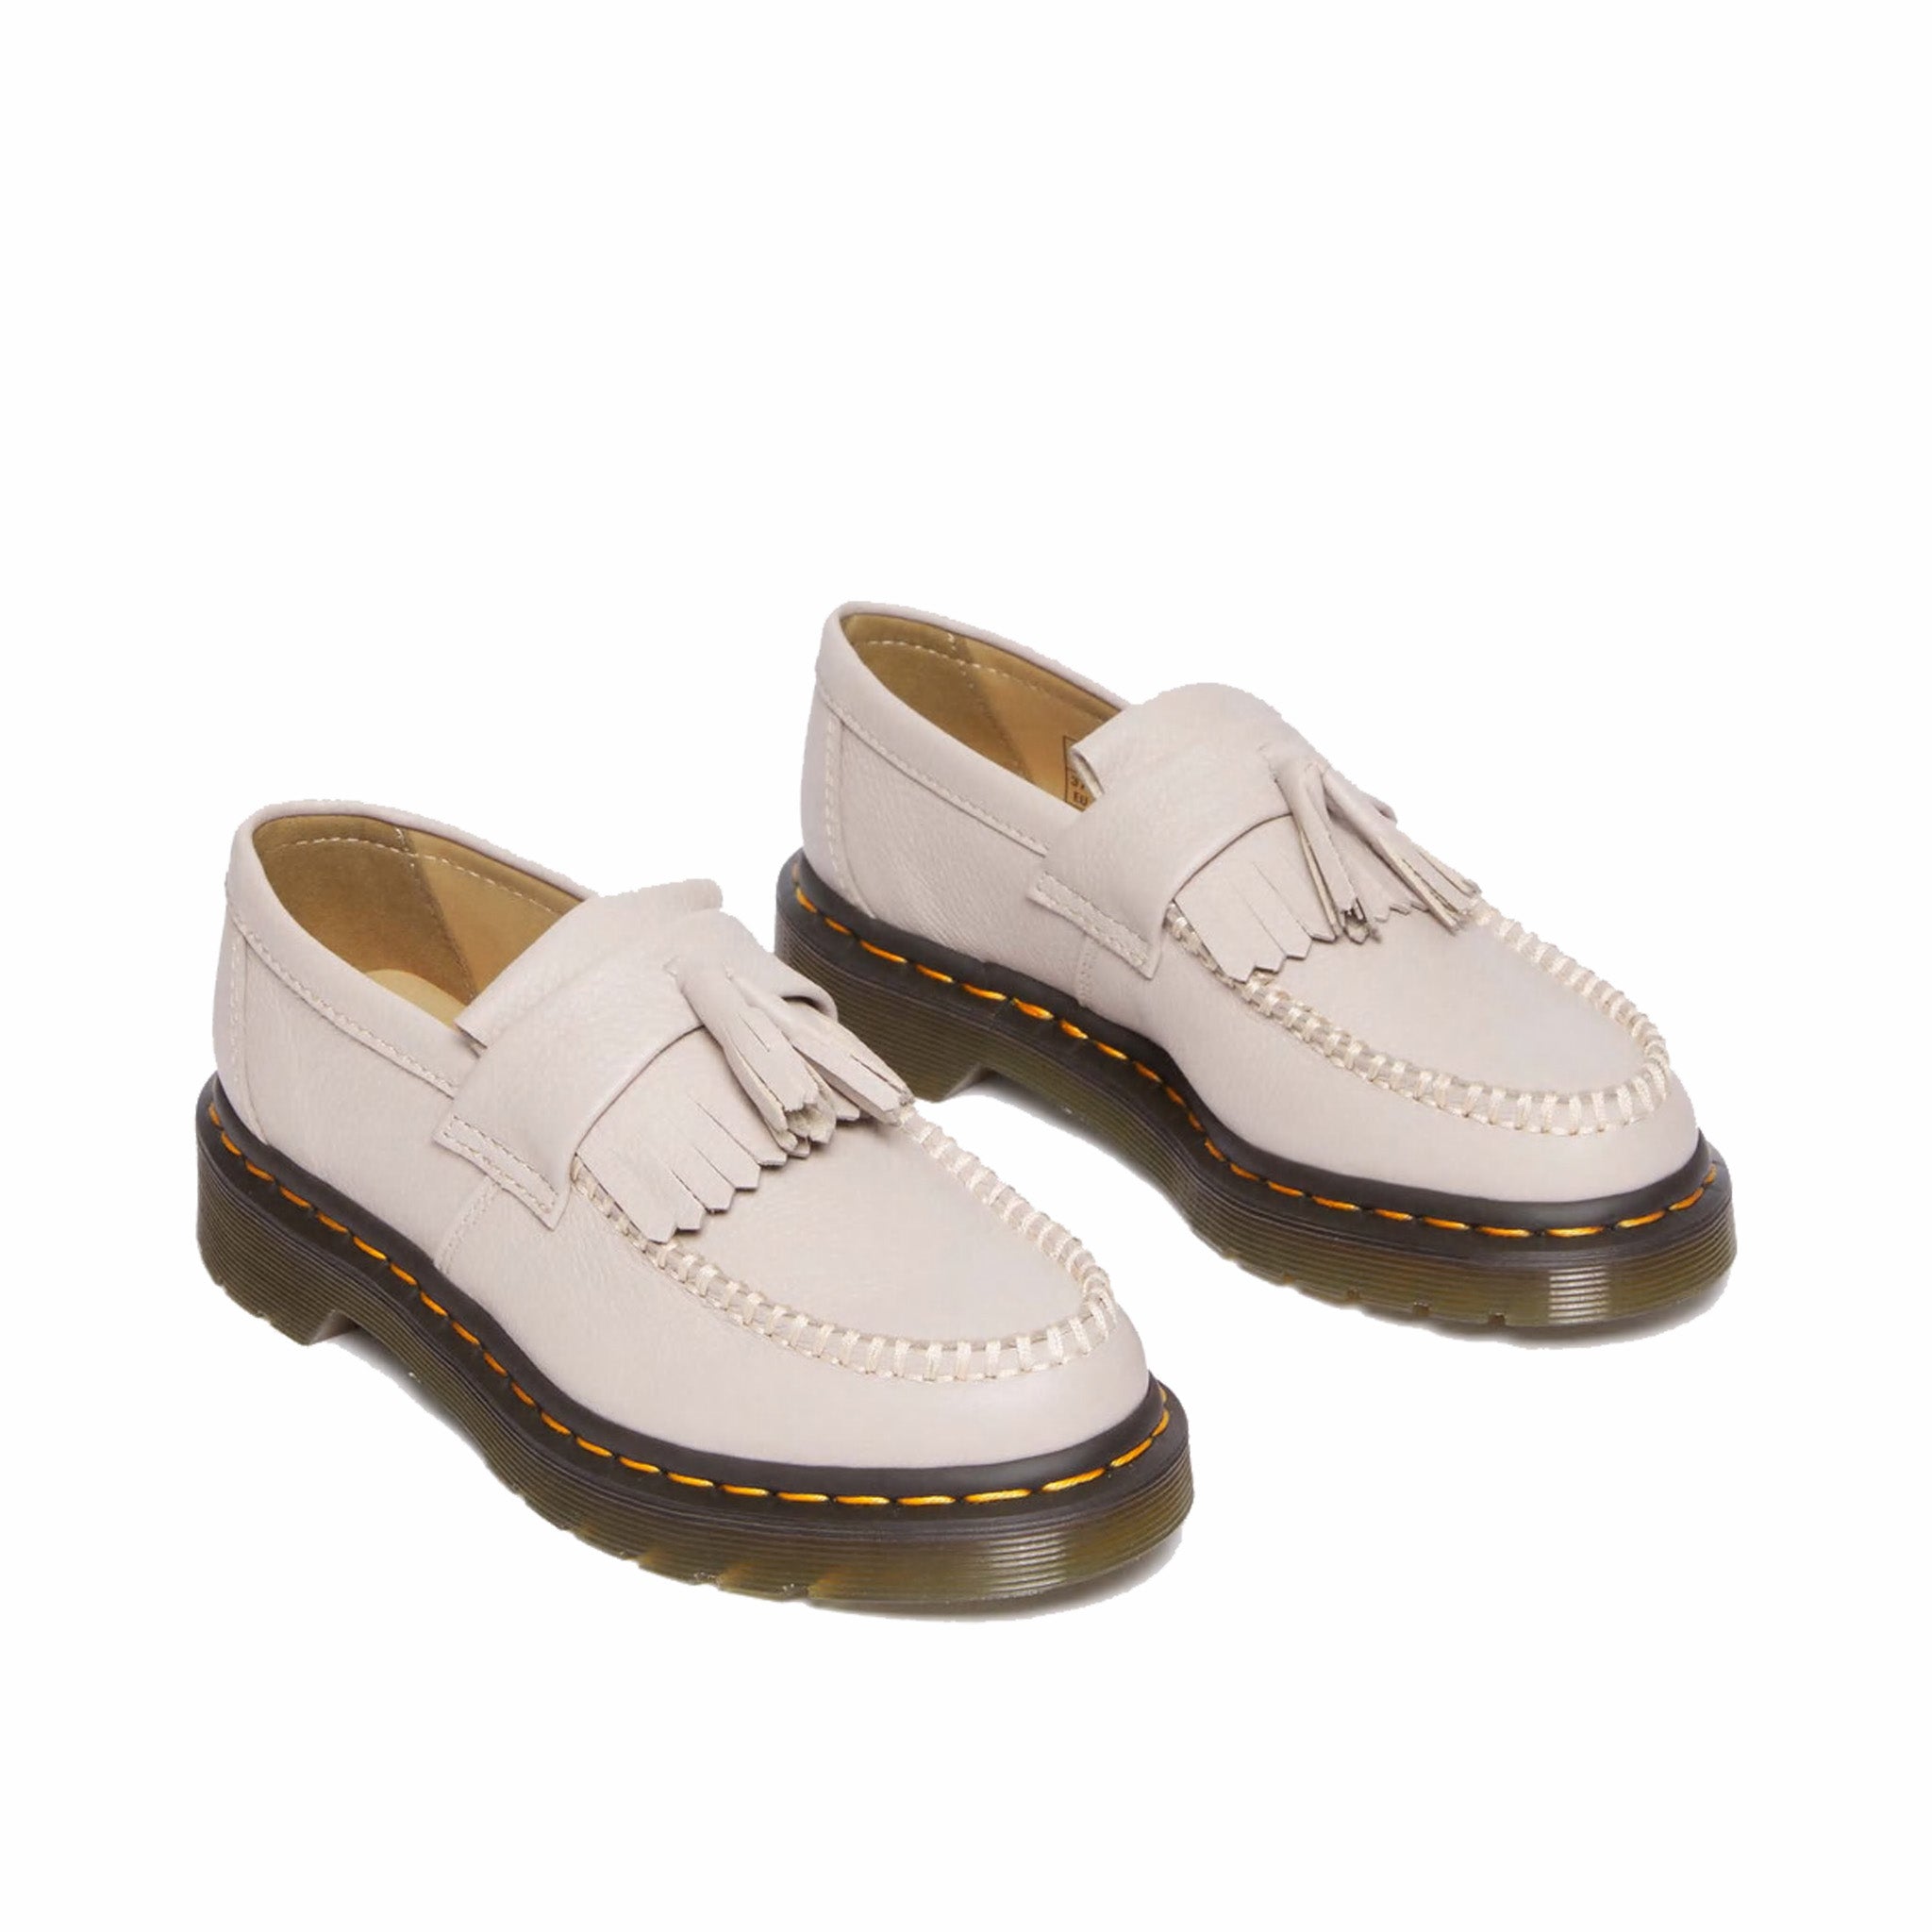 Dr. Martens Women’s Adrian Virginia Leather Tassel Loafers (Vintage Taupe/Virginia) - August Shop